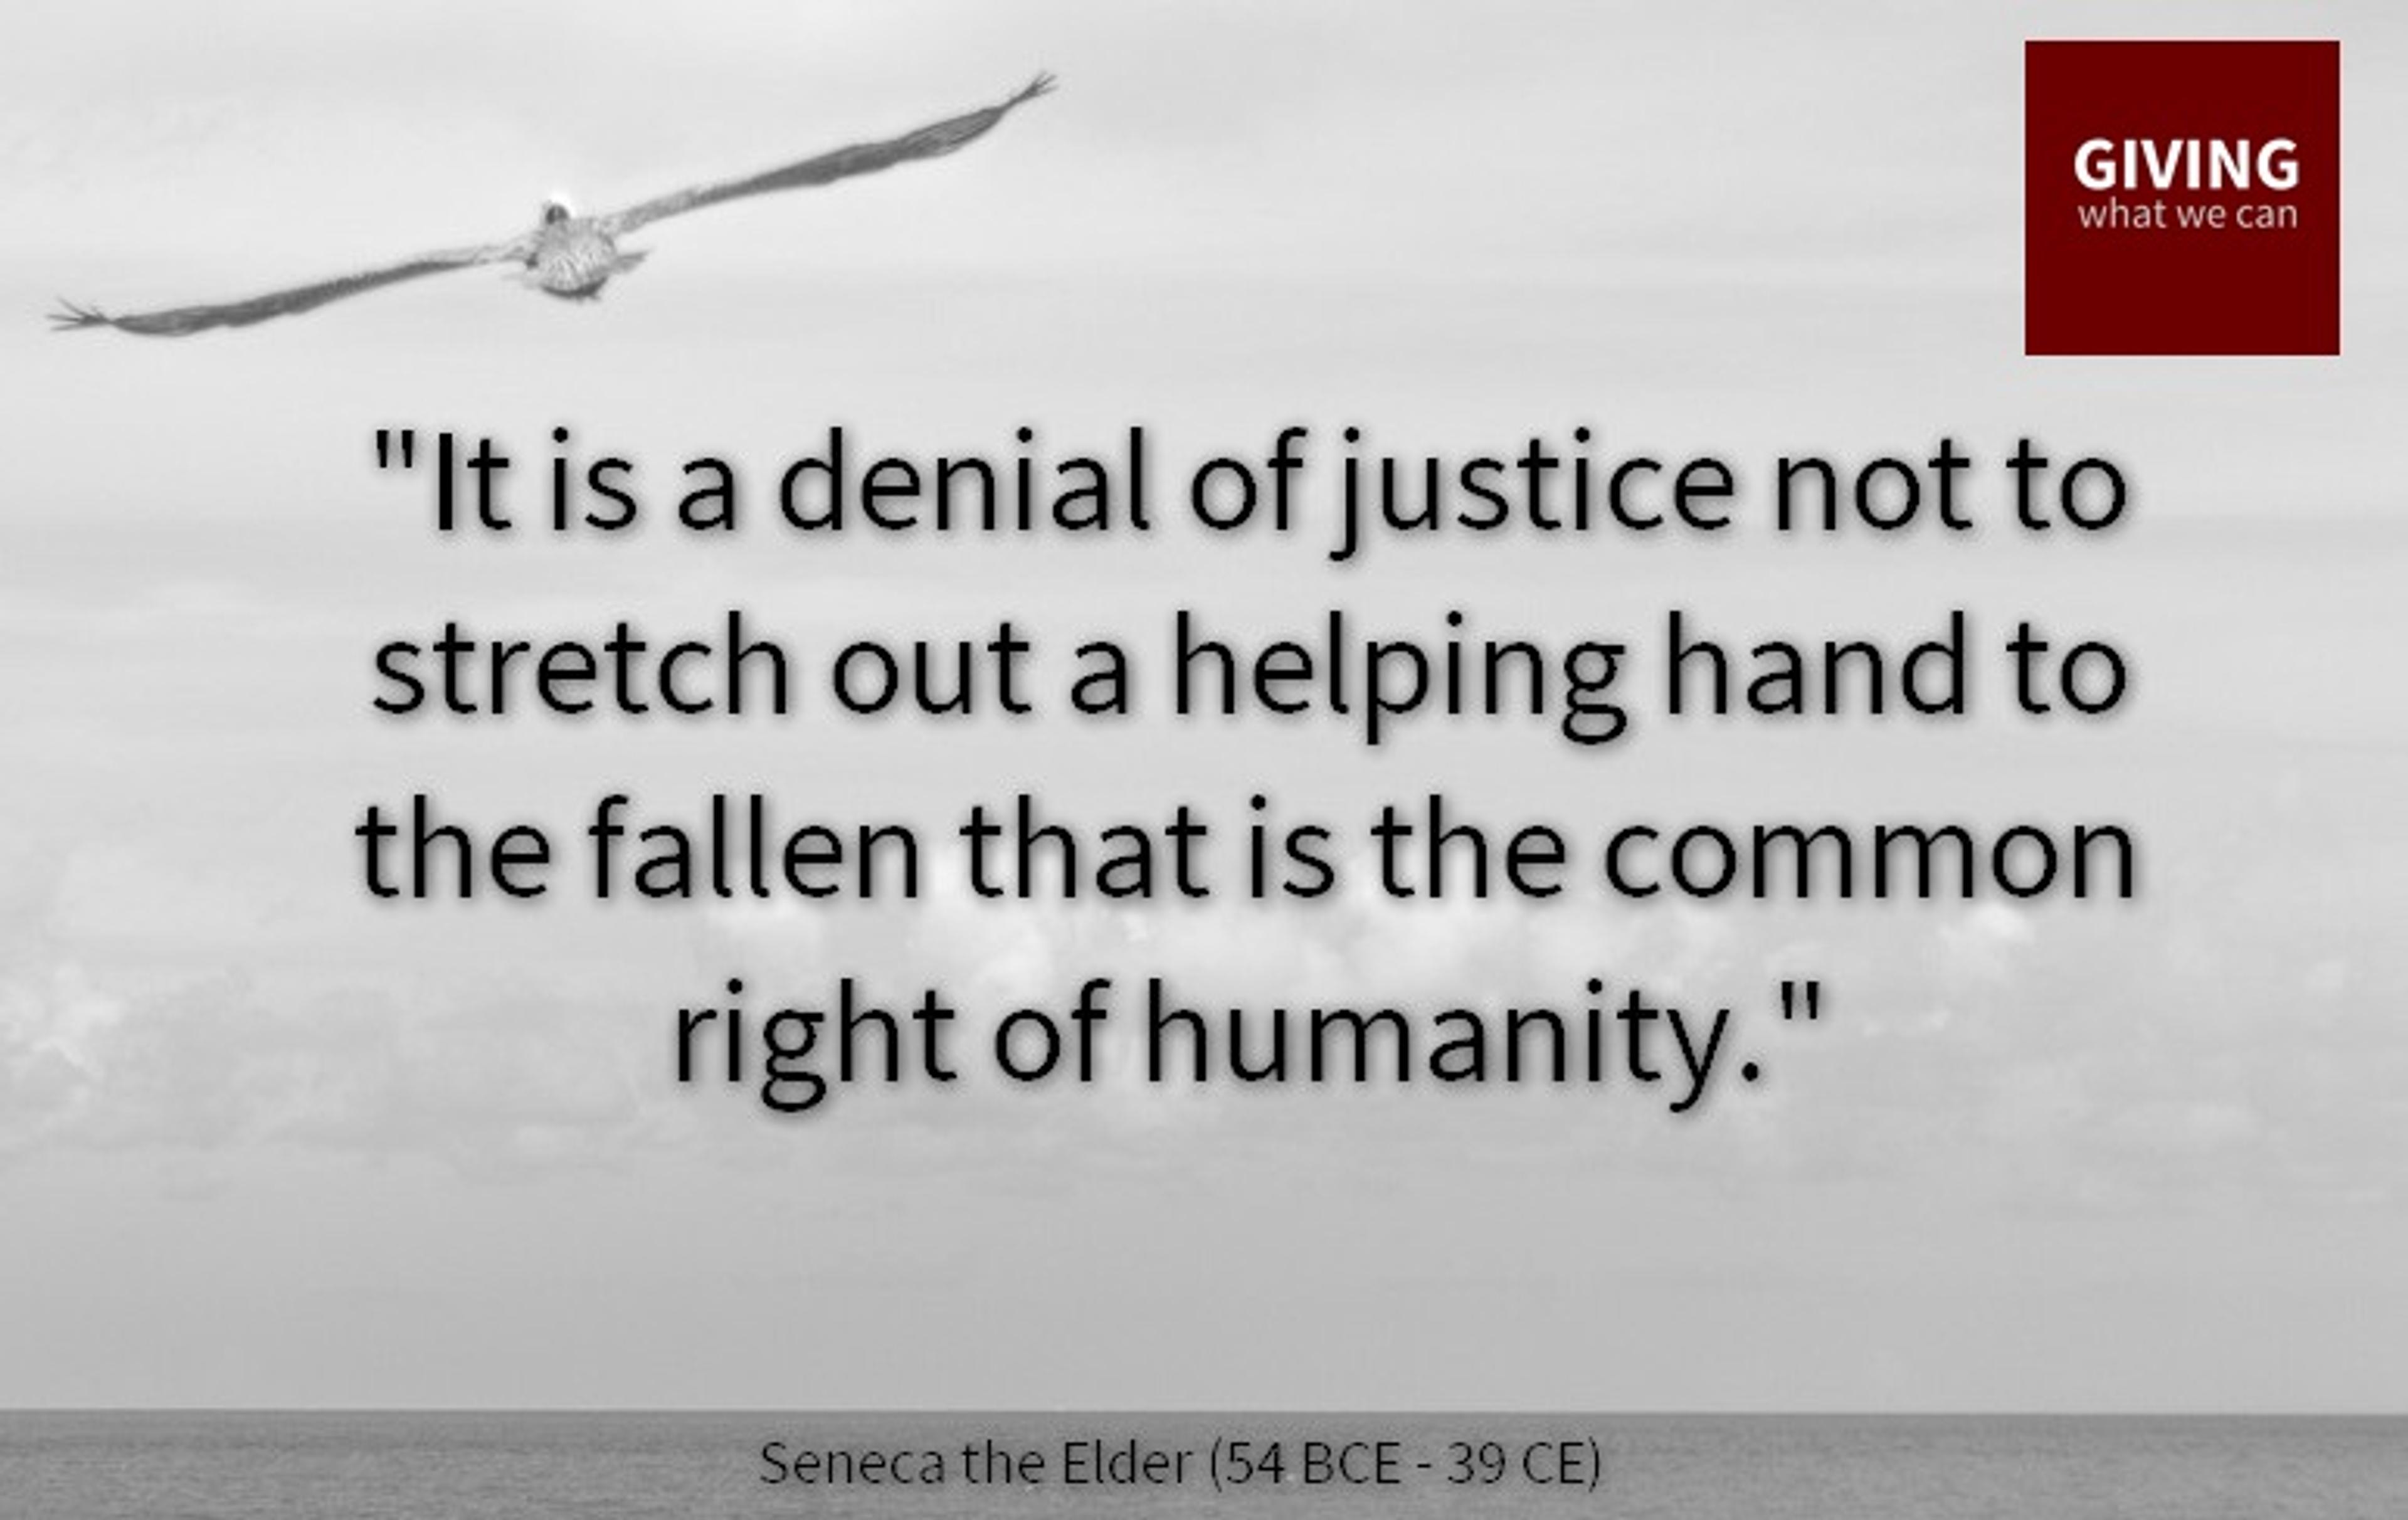 It is a denial of justice not to stretch out a helping hand to the fallen that is the common right of humanity